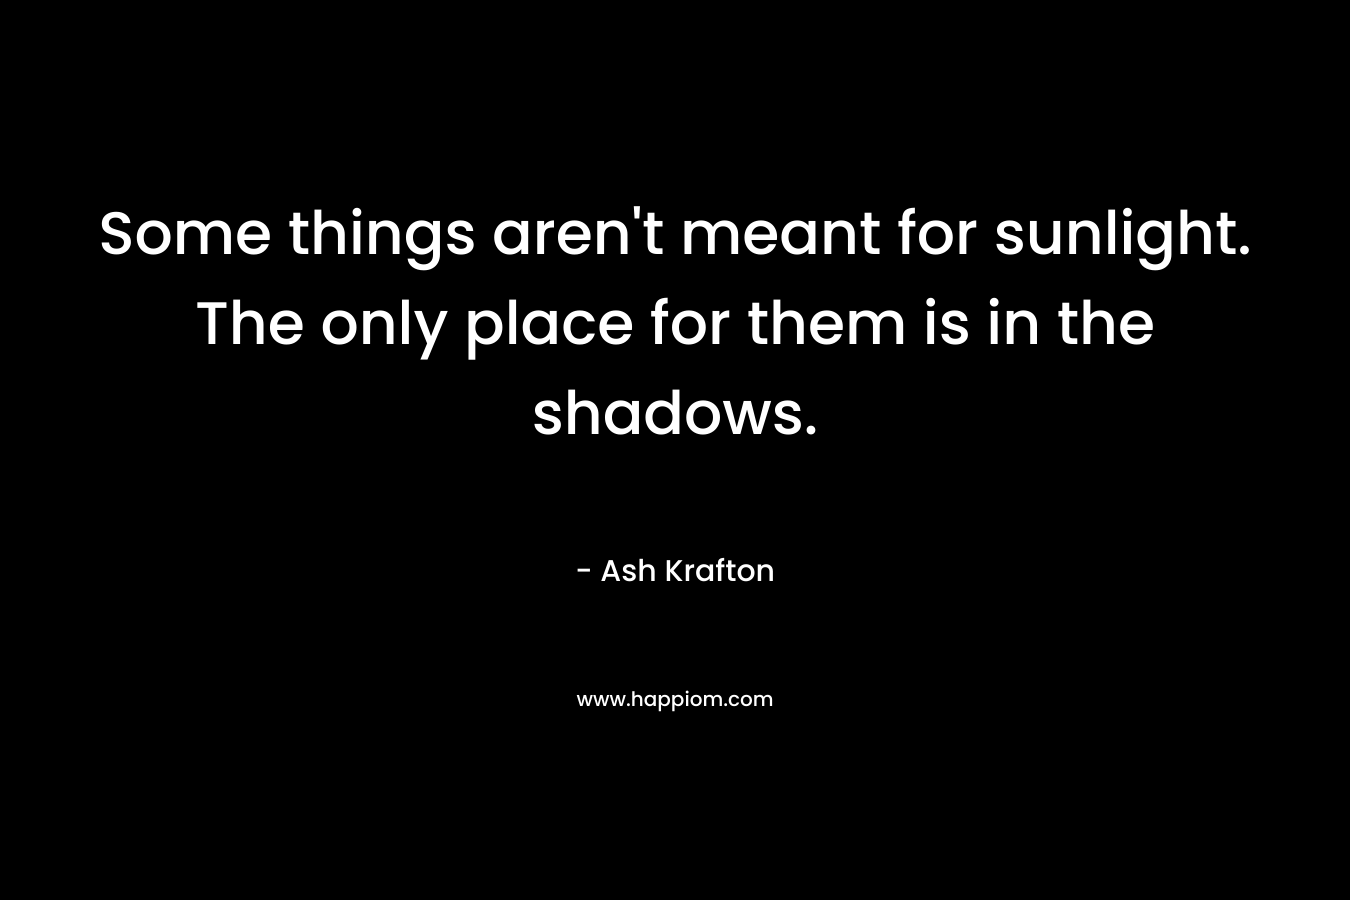 Some things aren’t meant for sunlight. The only place for them is in the shadows. – Ash Krafton